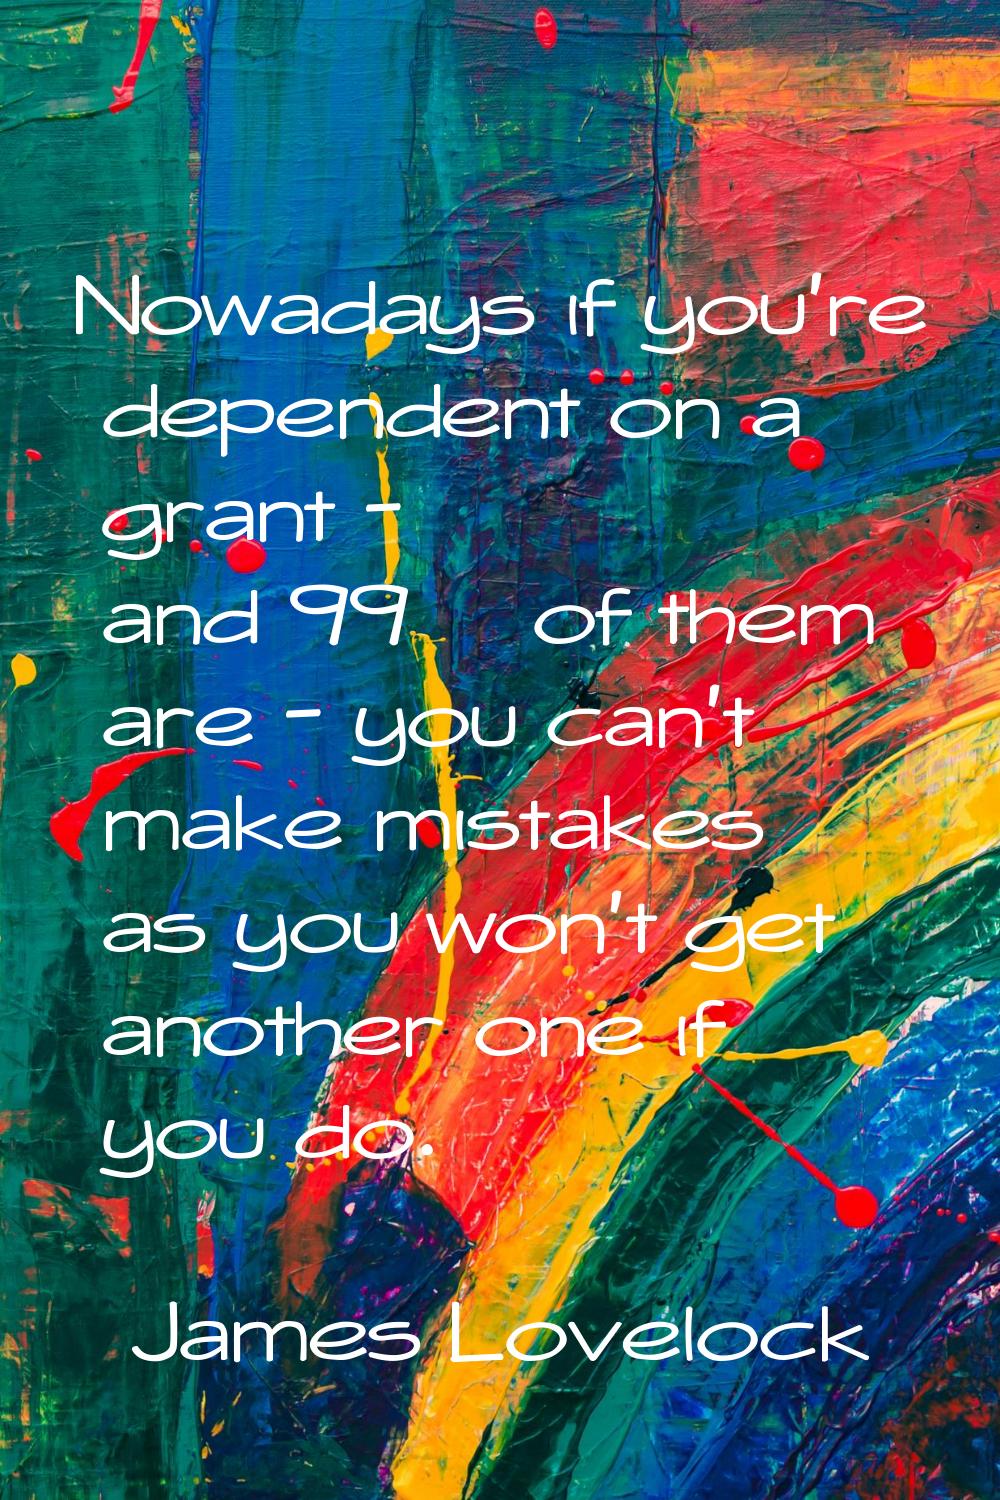 Nowadays if you're dependent on a grant - and 99% of them are - you can't make mistakes as you won'